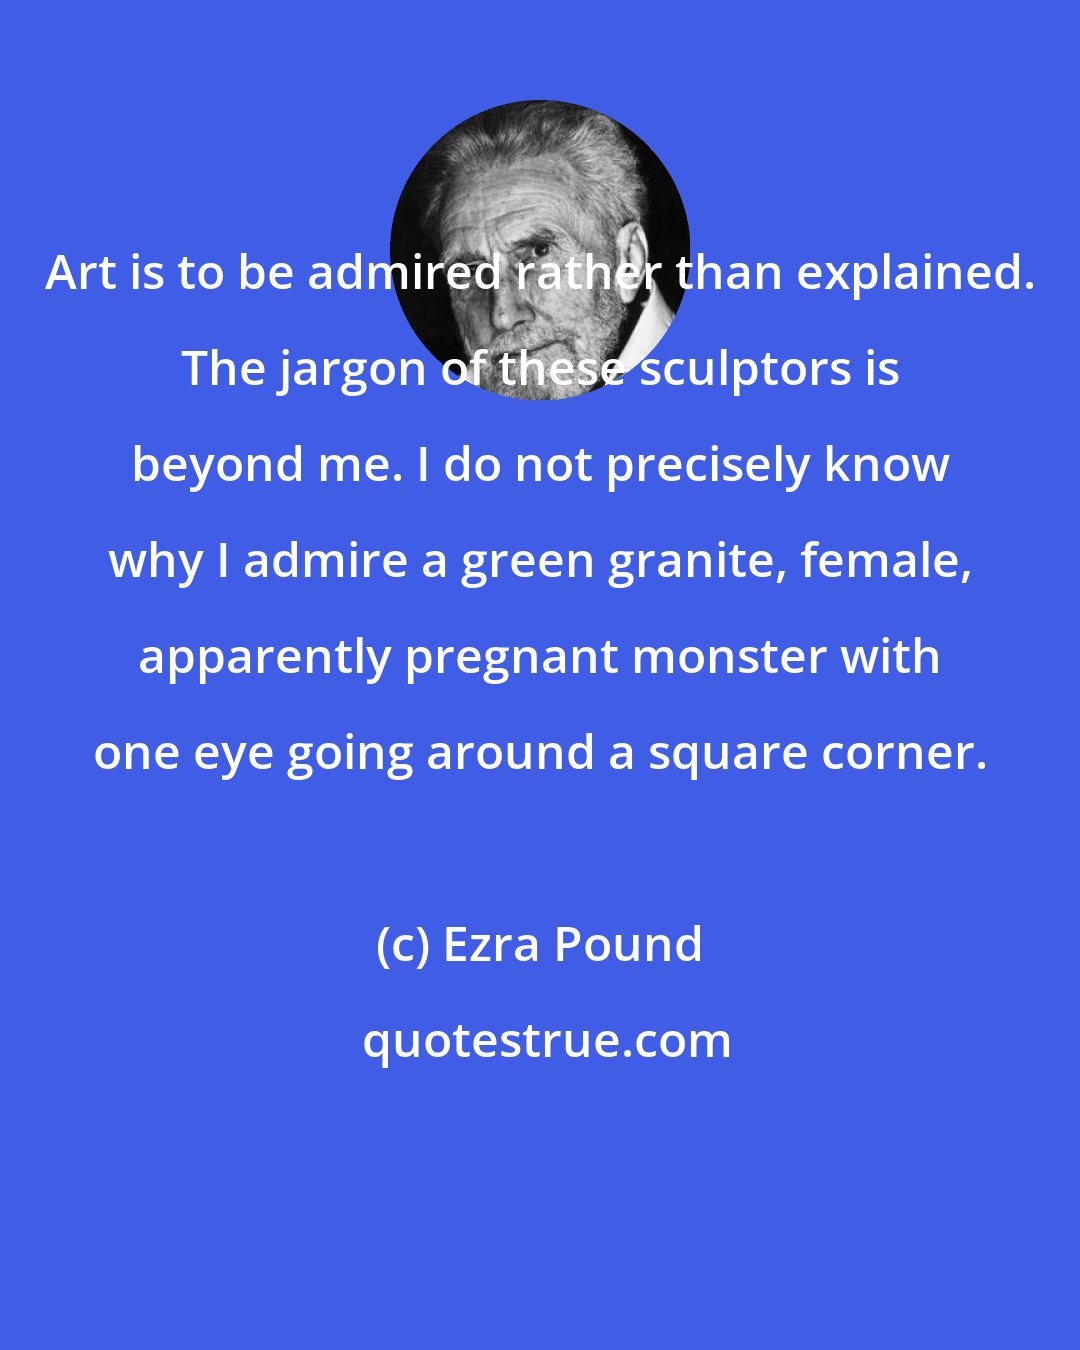 Ezra Pound: Art is to be admired rather than explained. The jargon of these sculptors is beyond me. I do not precisely know why I admire a green granite, female, apparently pregnant monster with one eye going around a square corner.